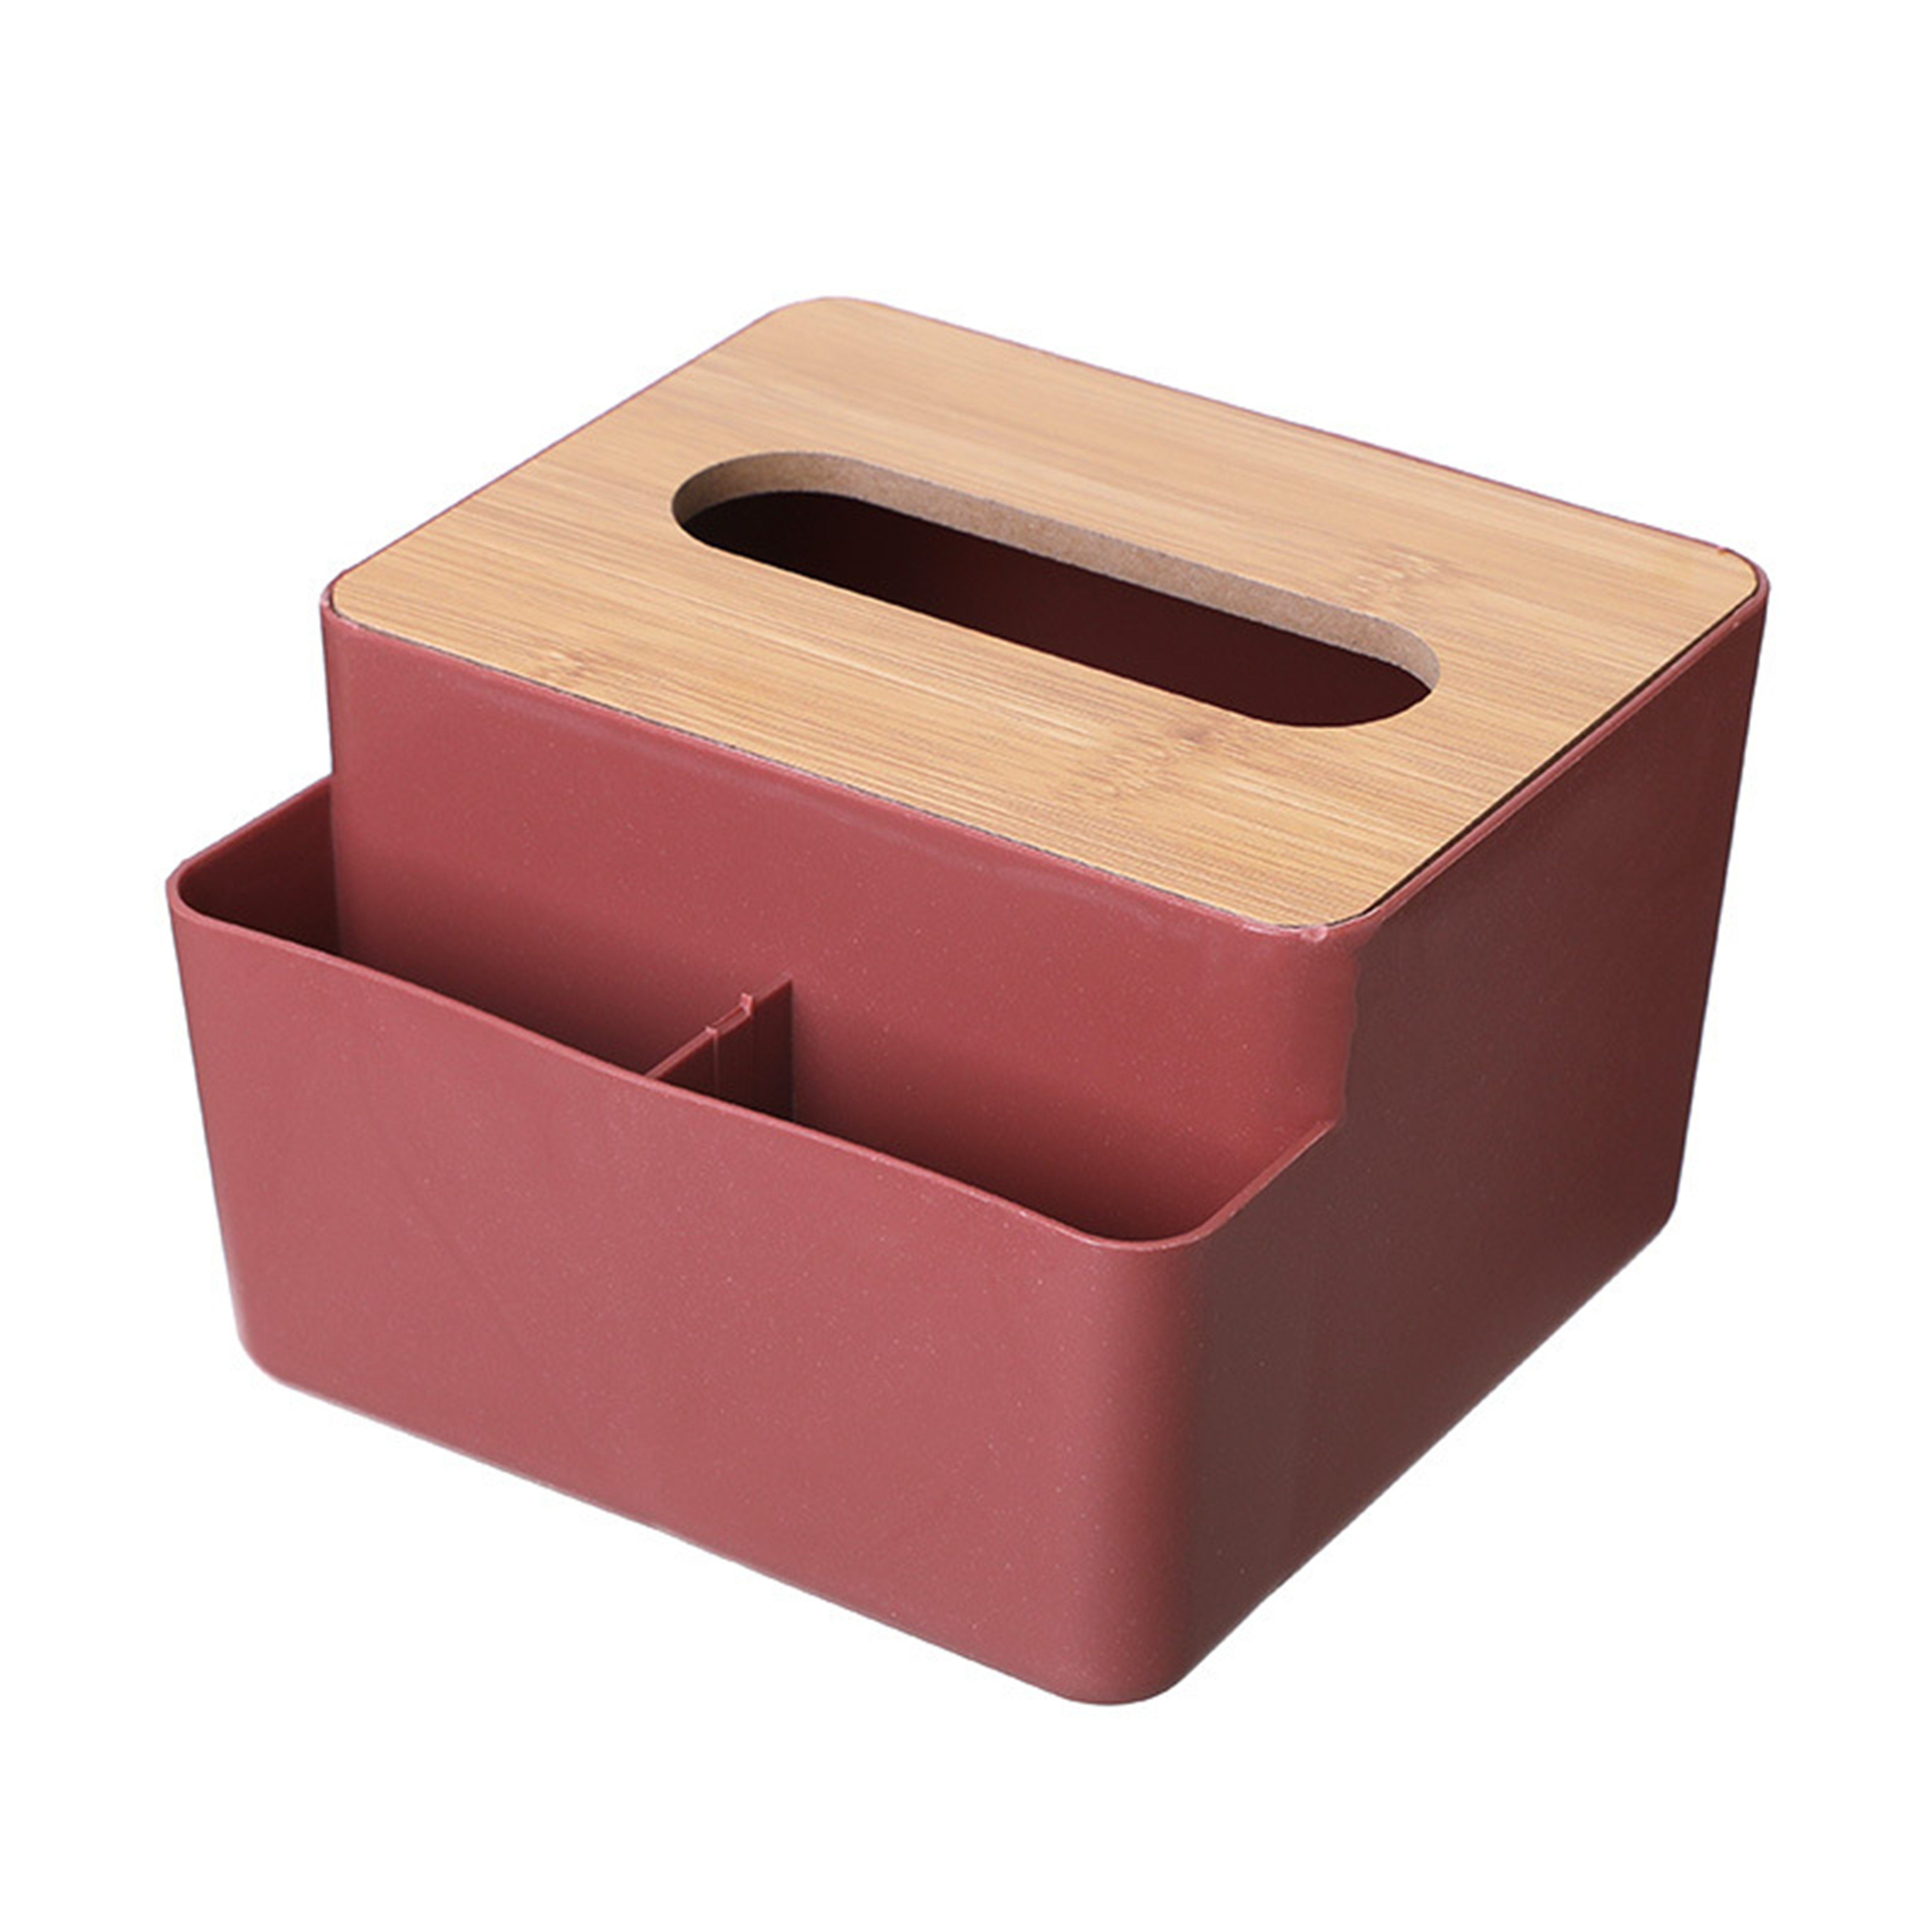  Multi functional paper towel box with bamboo and wood cover